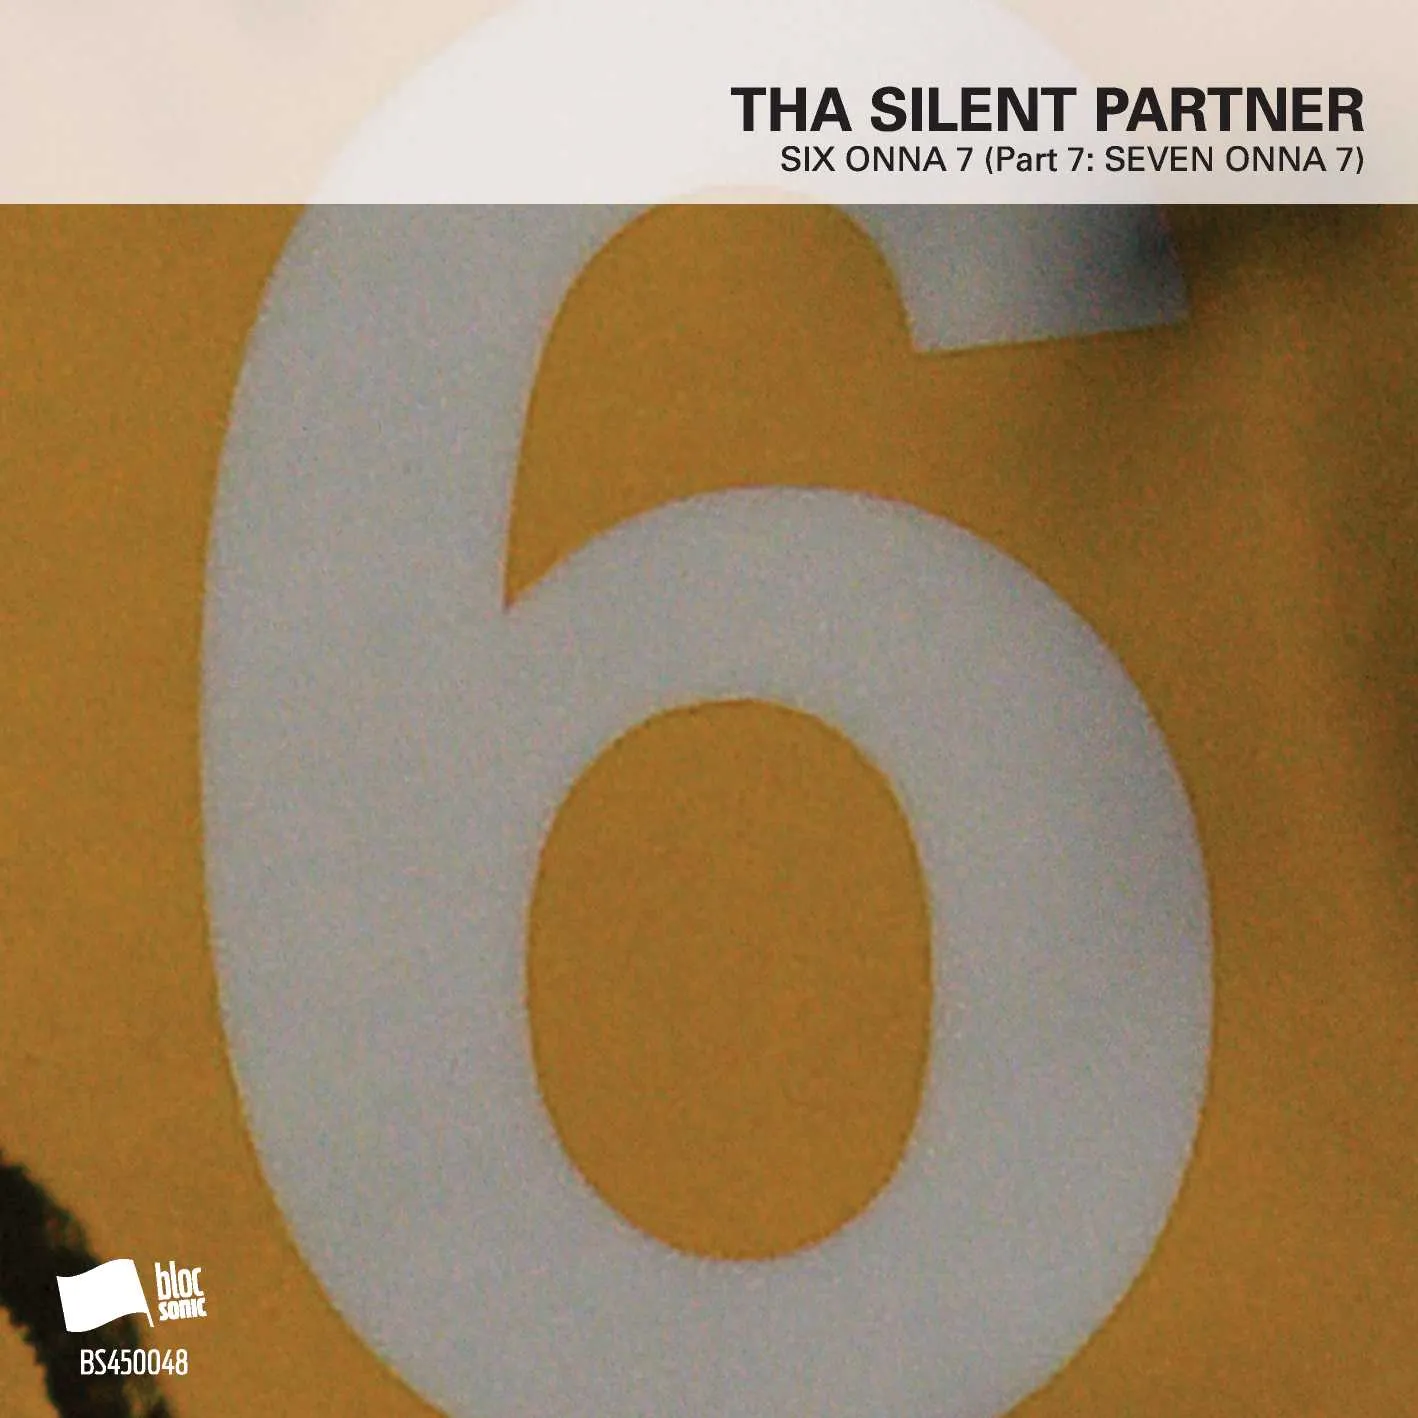 Album cover for “SIX ONNA 7 (Part 7: SEVEN ONNA 7)” by Tha Silent Partner